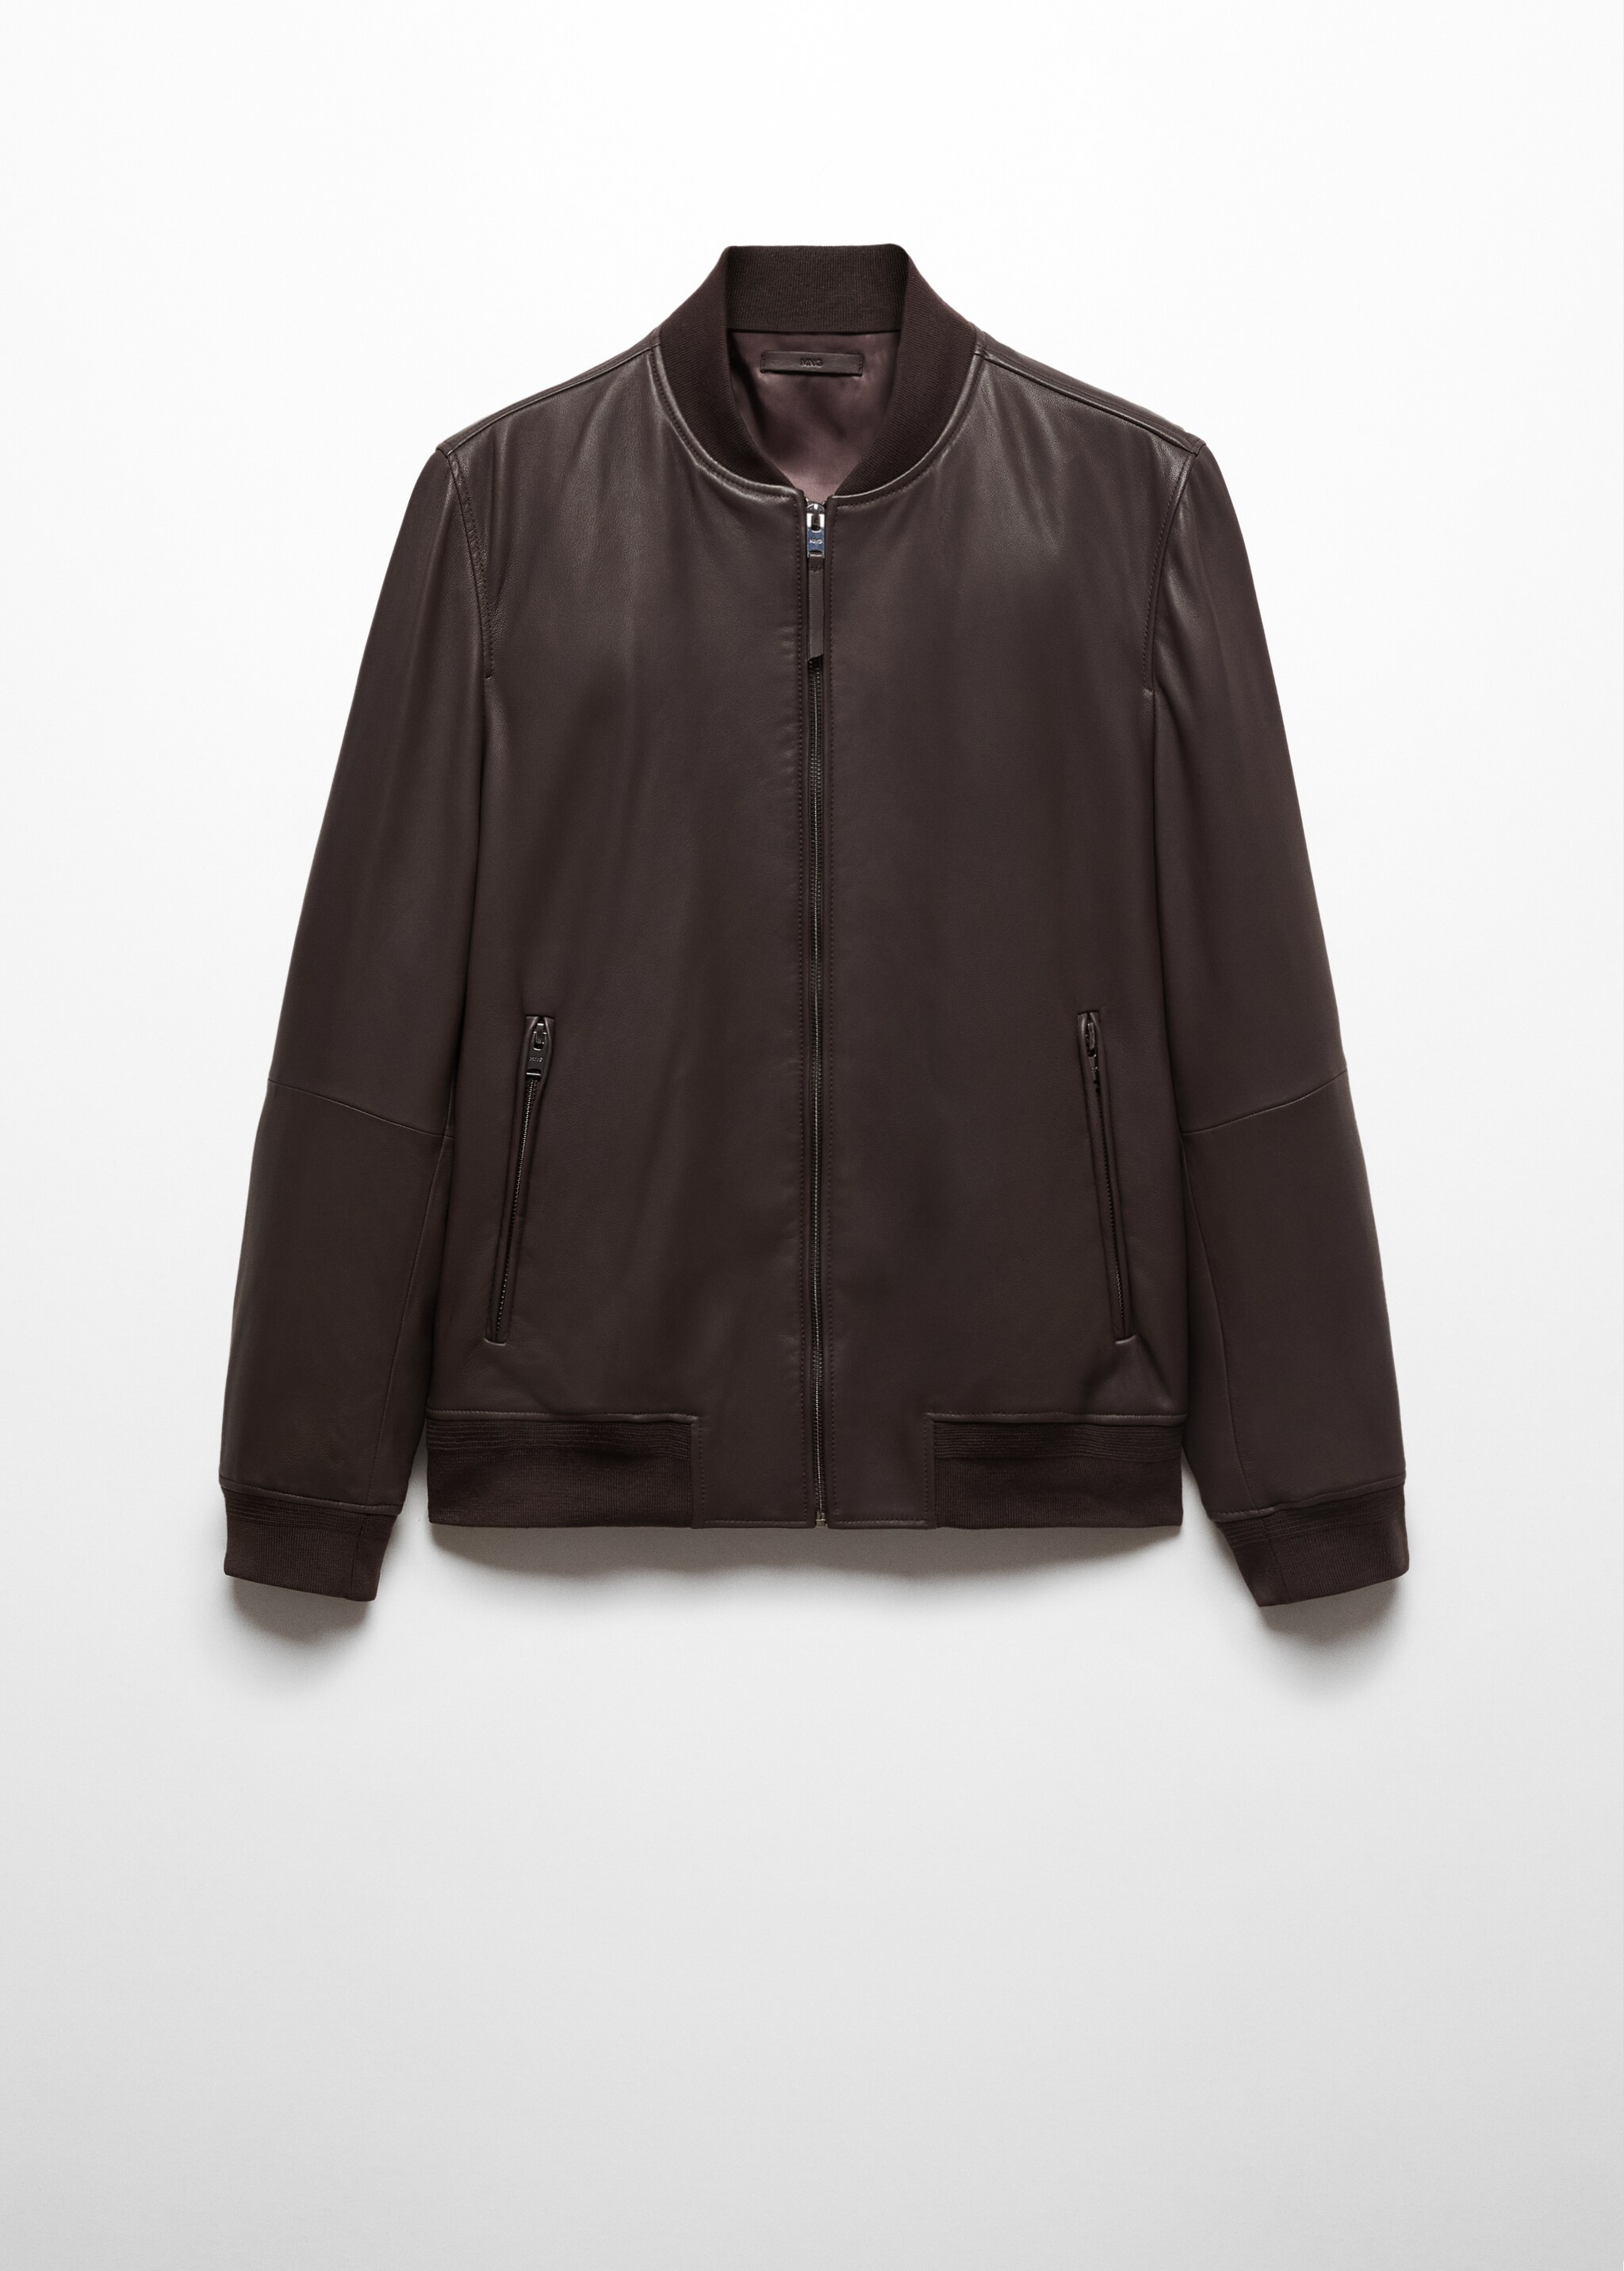 100% nappa leather jacket - Article without model